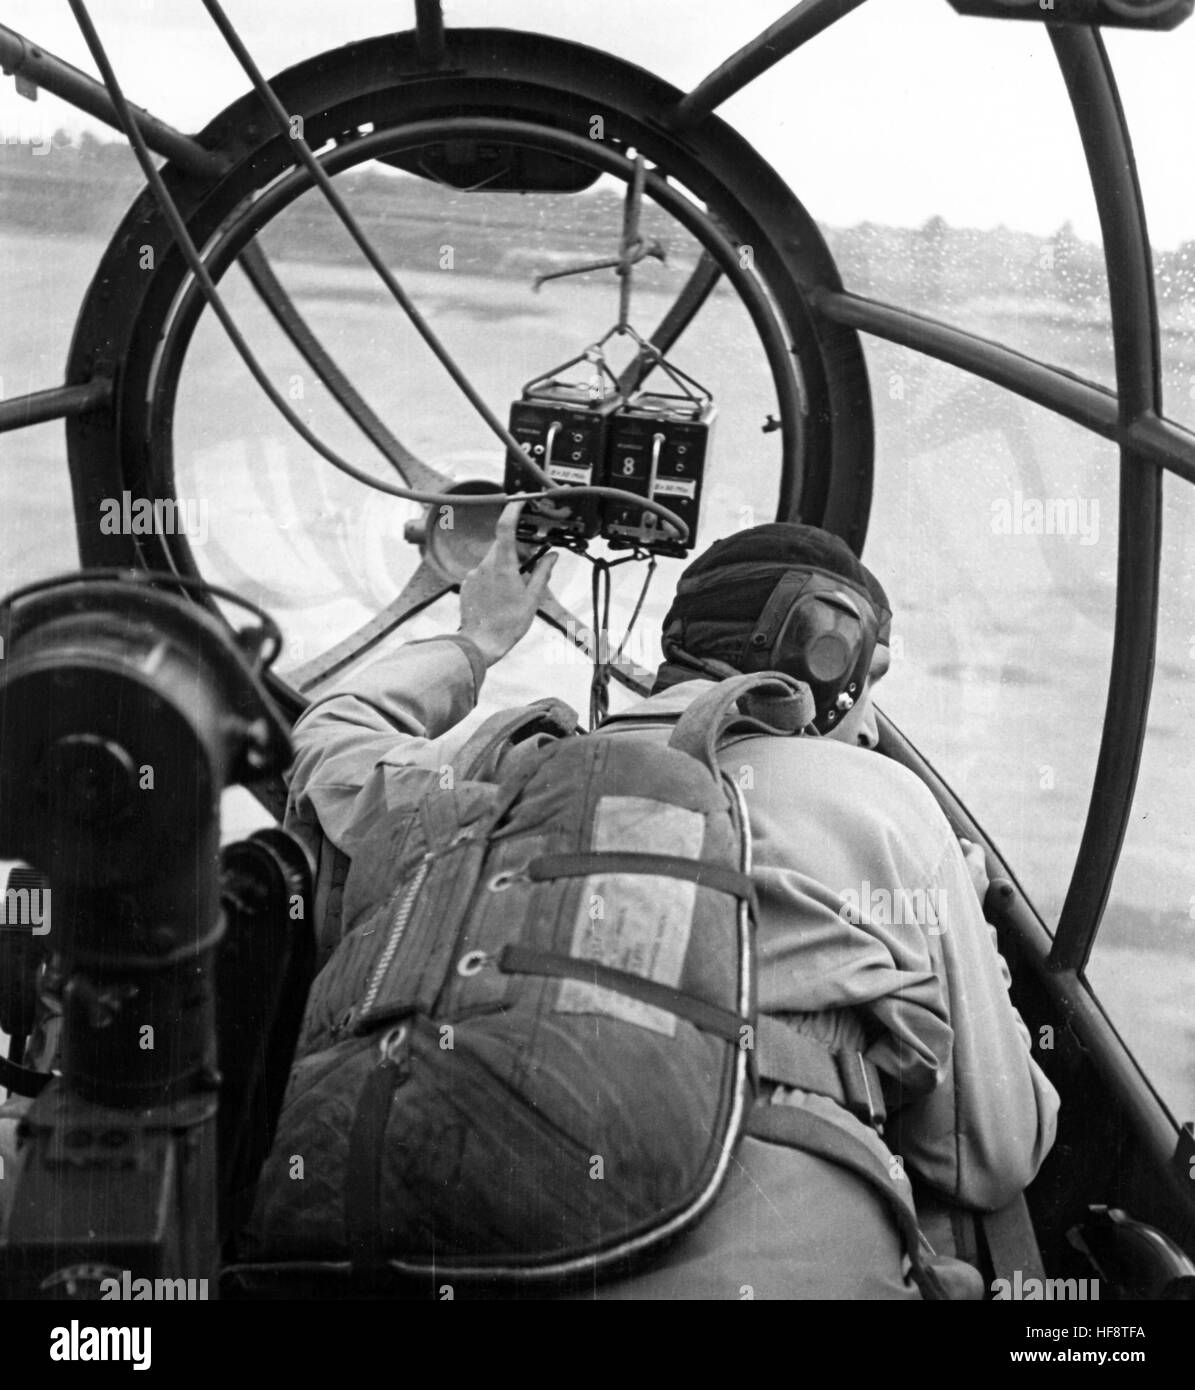 The Nazi image shows a test pilot in a mask and parachute at a tacograph in the cockpit of a German Luftwaffe Heinkel He 111 combat plane during an aircraft test flight. Publishing date Unknown. Fotoarchiv für Zeitgeschichtee - NO WIRELESS SERVICE - | usage worldwide Stock Photo